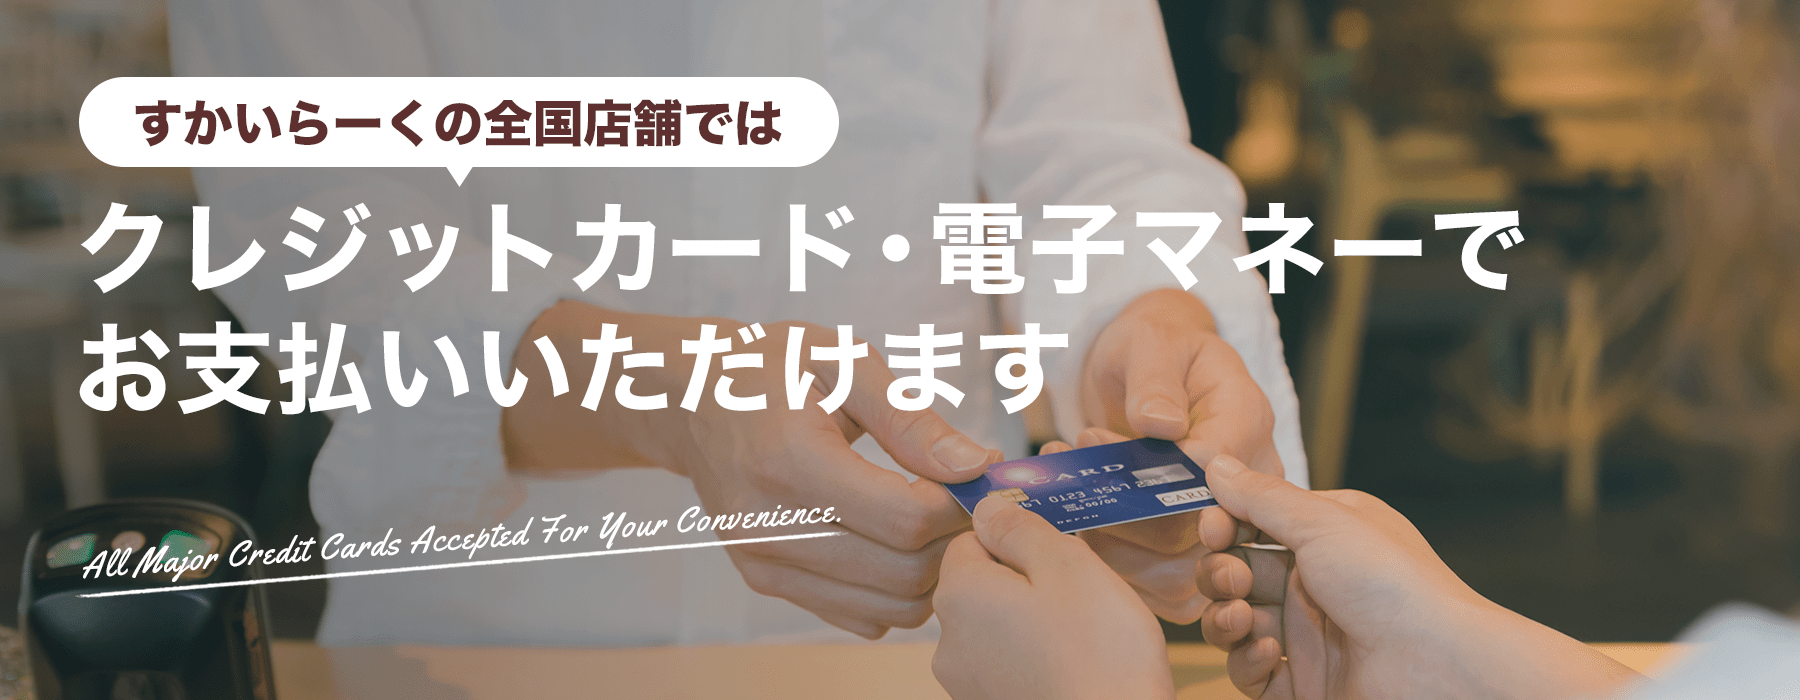 Skylark（すかいらーく） You can pay with credit card / electronic money at nationwide stores in